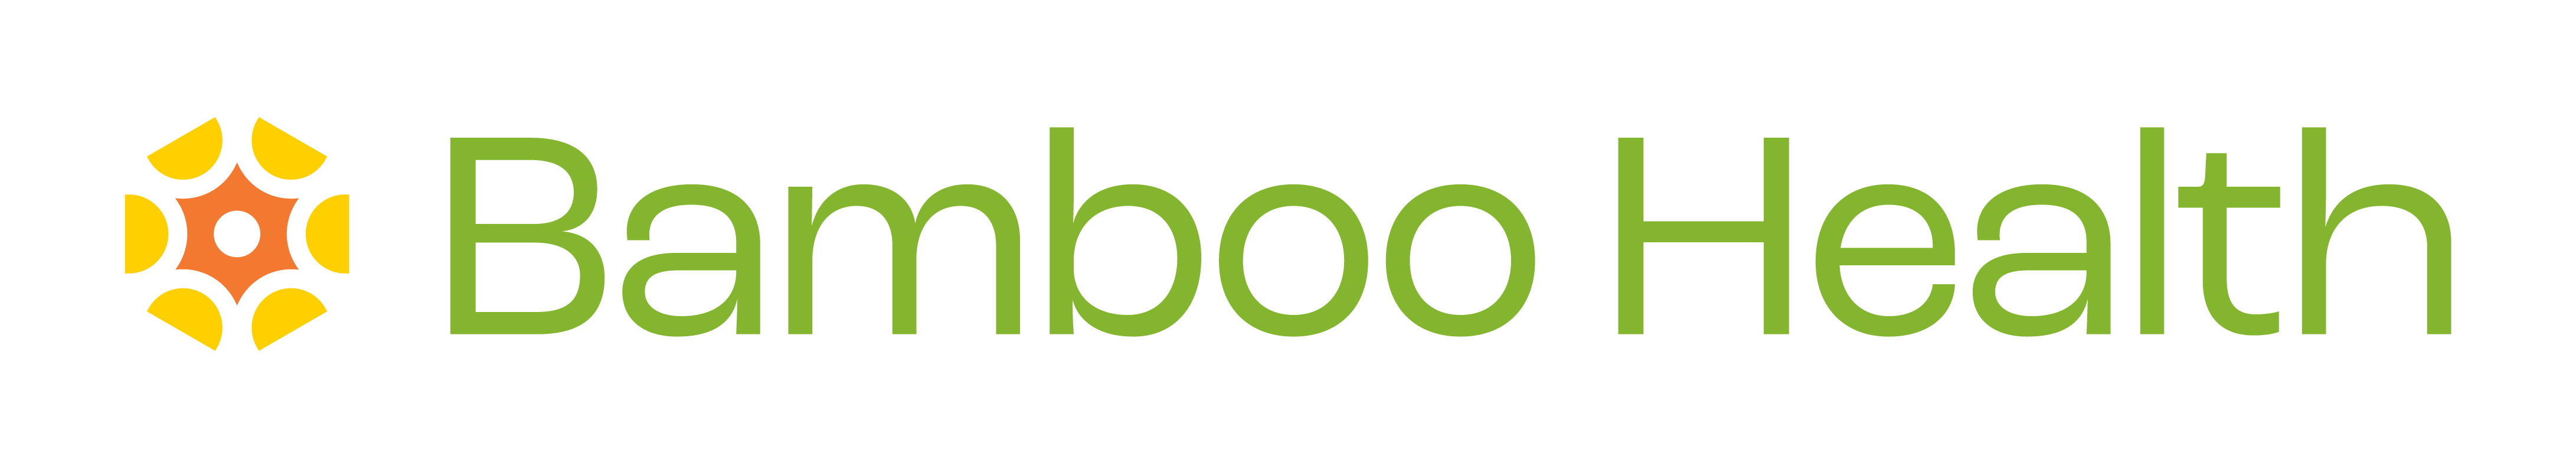 BambooHealth-Logo_Primary-Long-COLOR.png